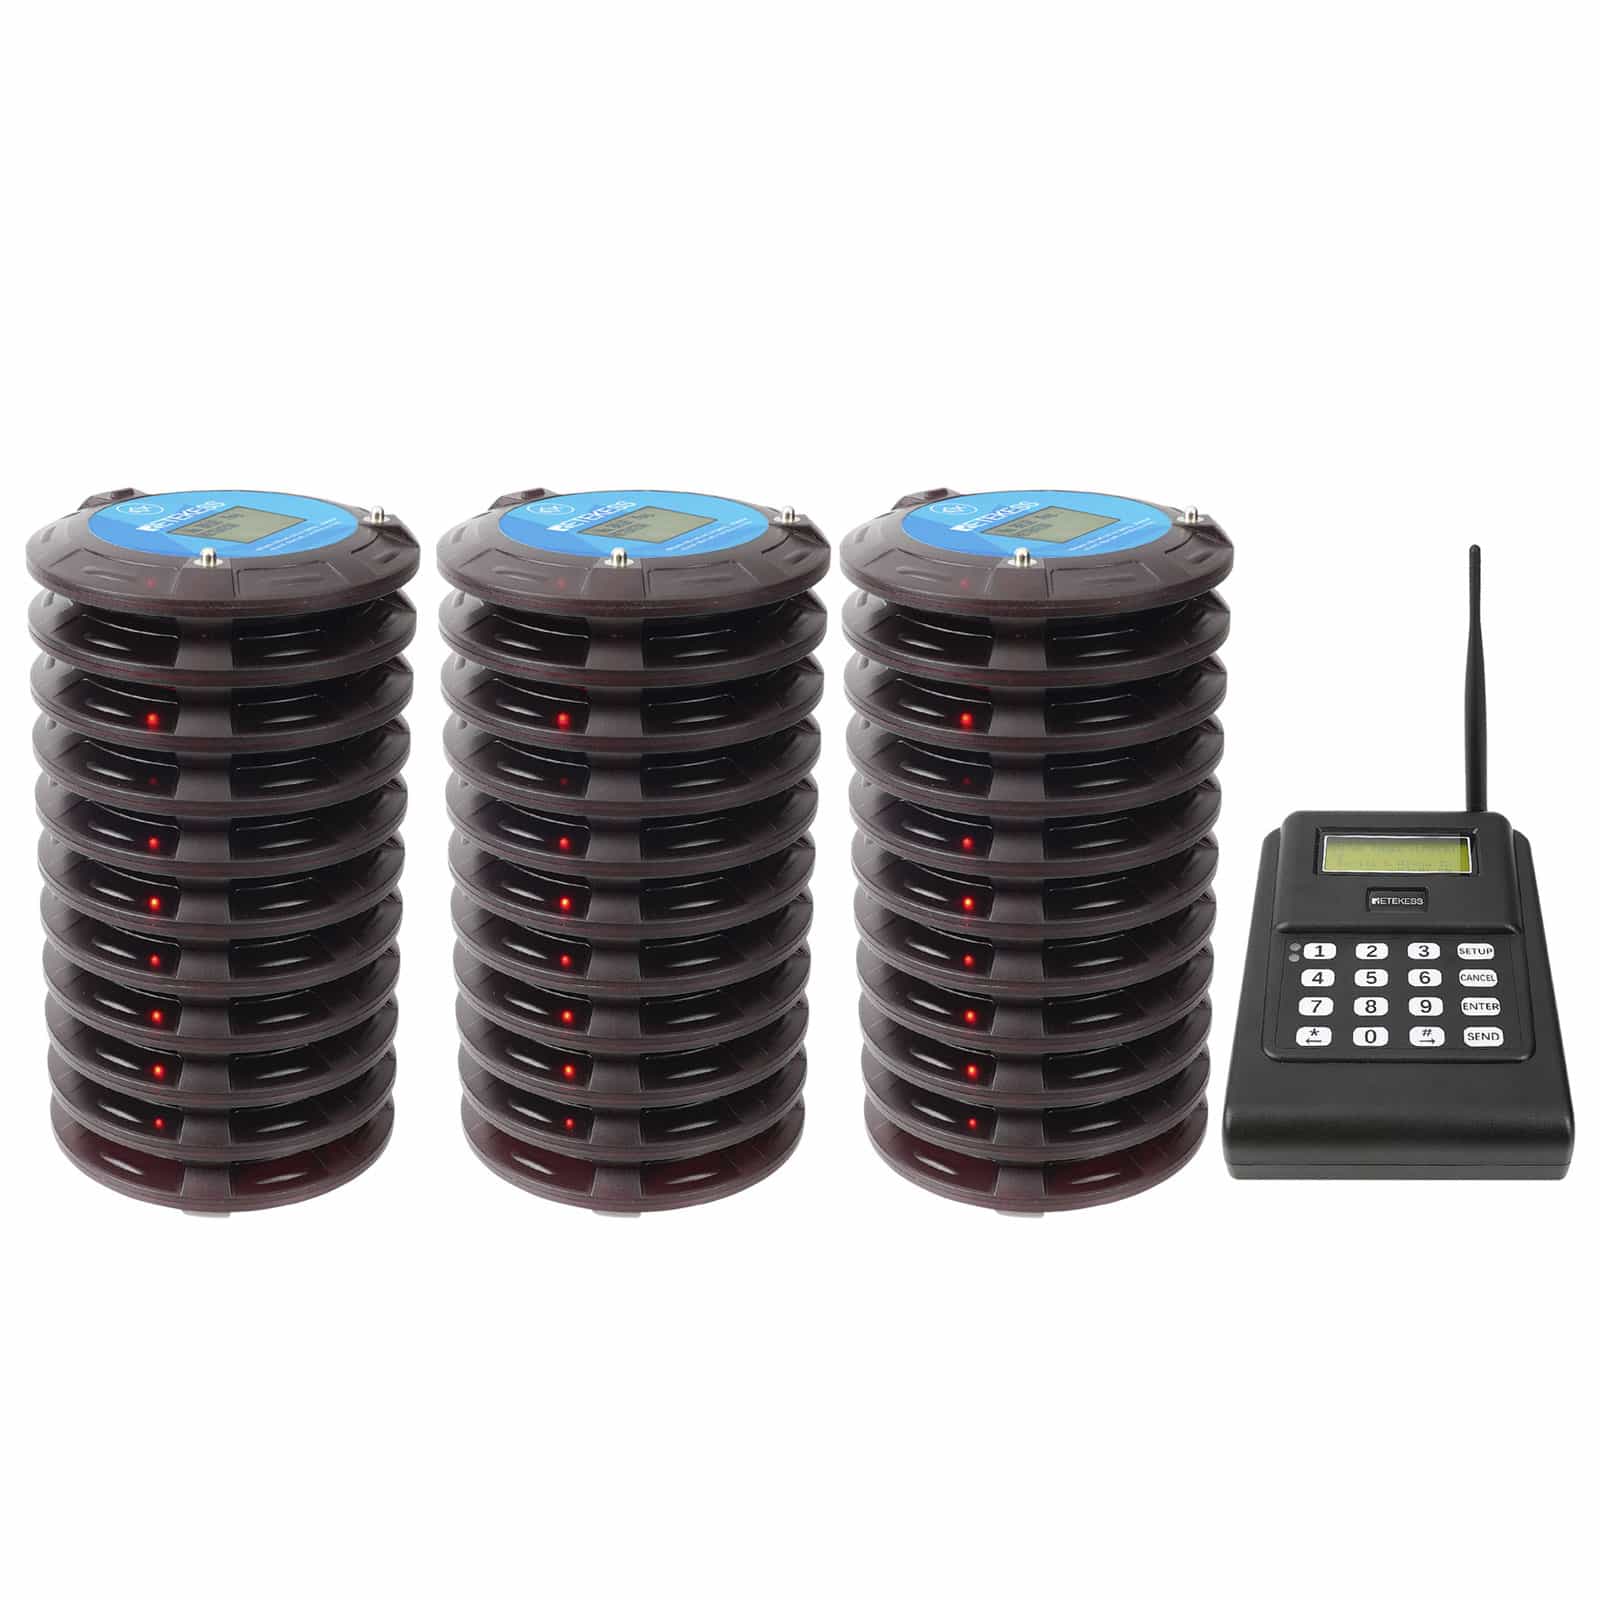 TD166 Alphanumeric Pager Long Range Paging System for Manufacturing & Warehouses. 1 Keypad 30 Pagers